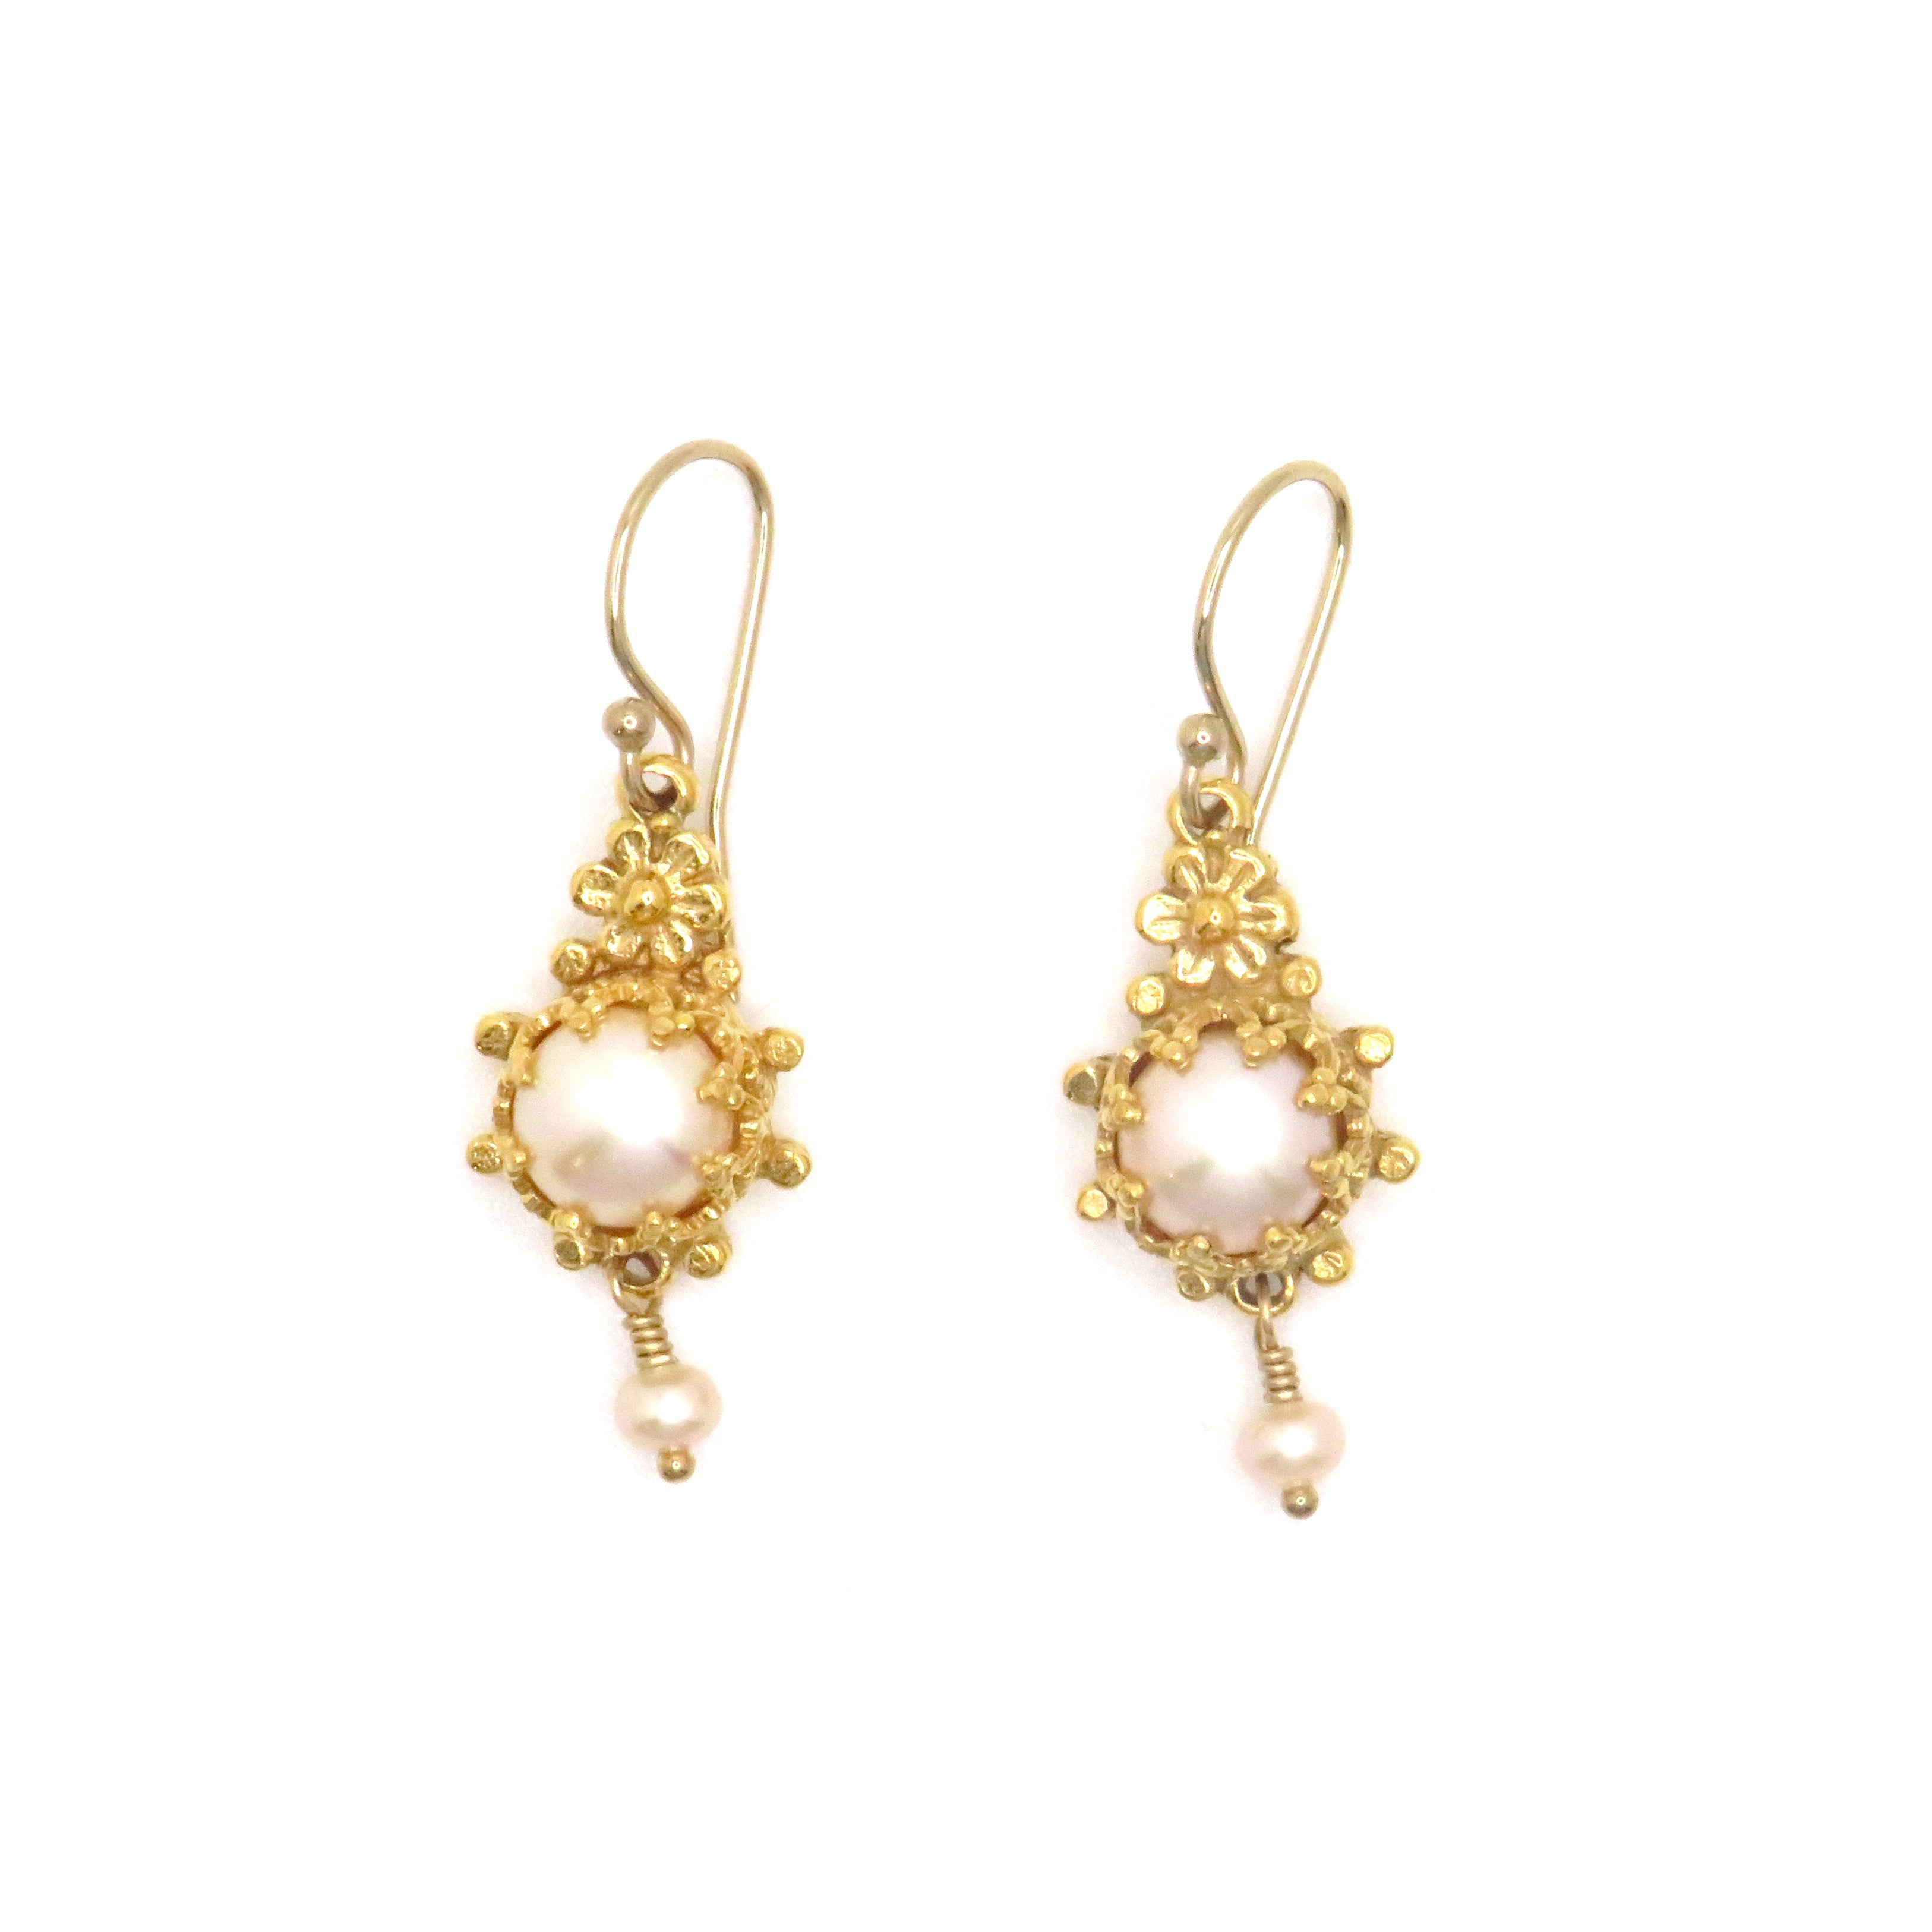 gold drop earrings with pearls